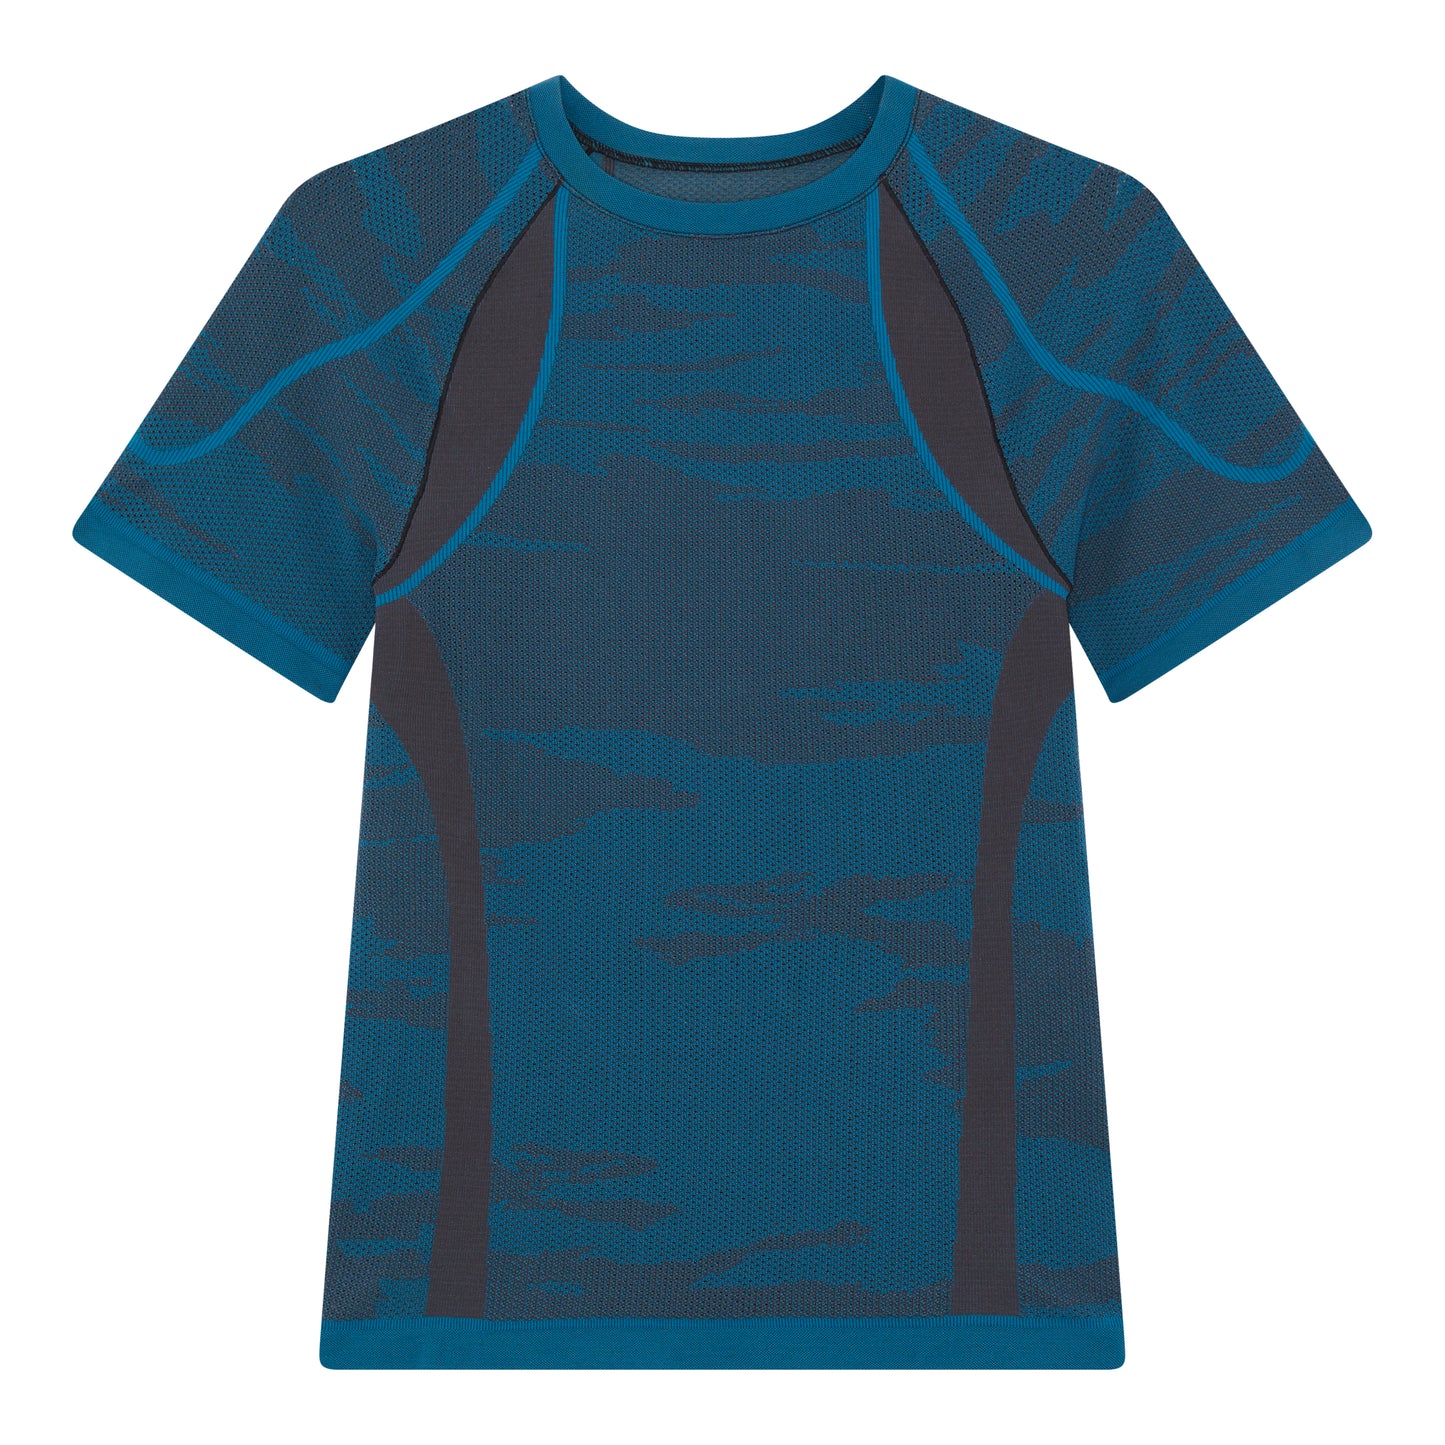 INDIAN OCEAN SHORT SLEEVE SEAMLESS KNIT COMPRESSION - TEAL/ANTHRACITE